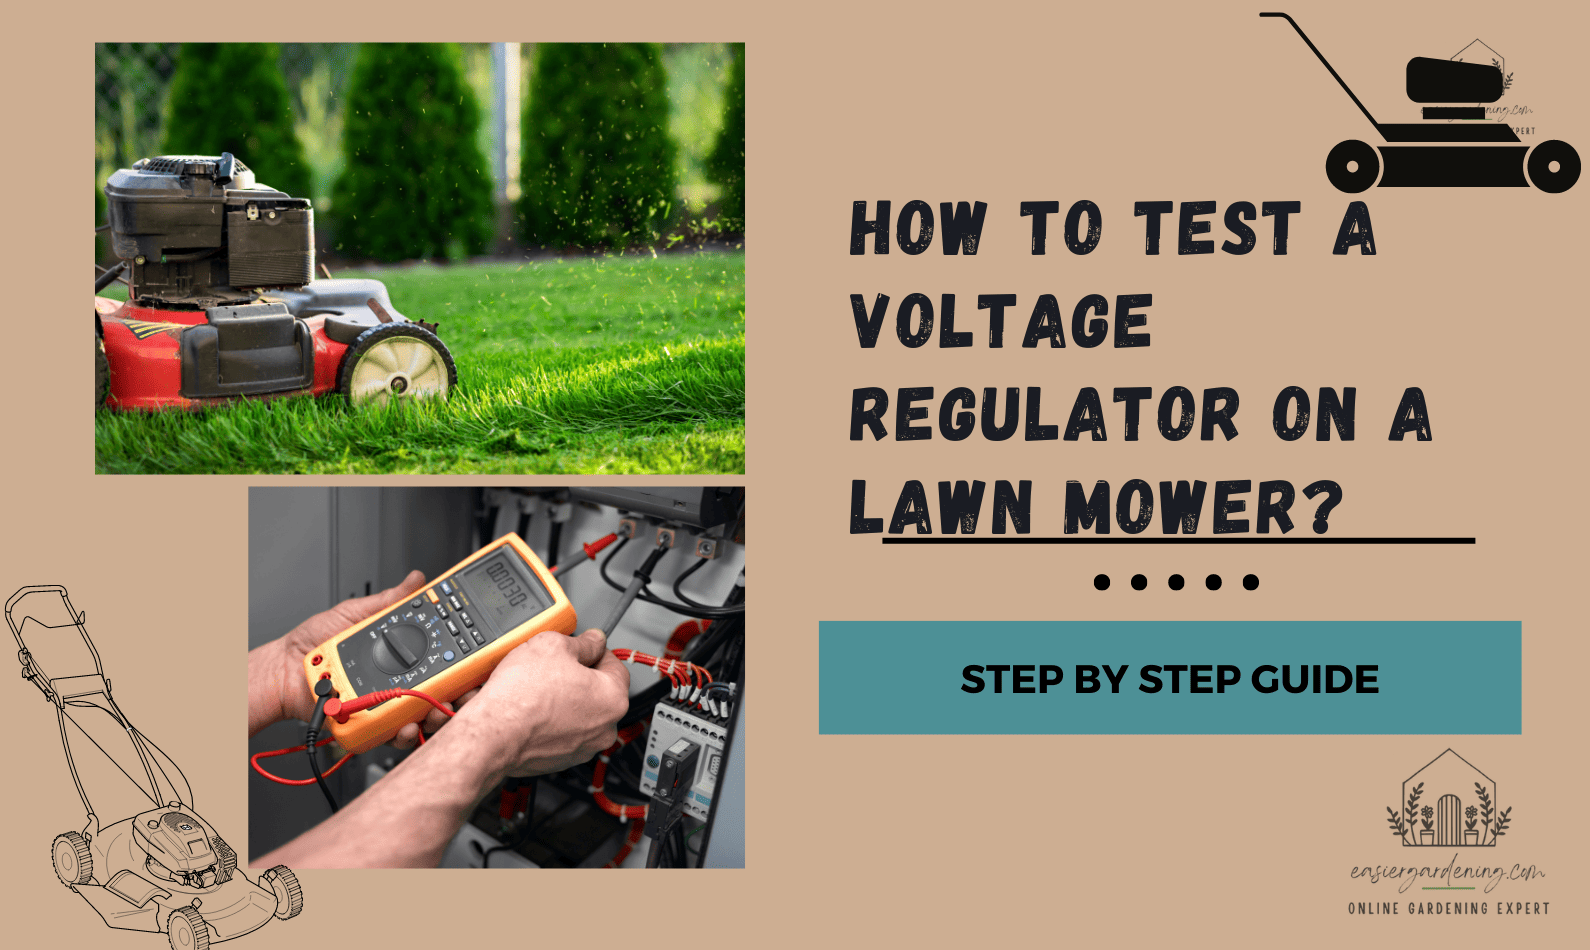 How to Test a Voltage Regulator on a Lawn Mower?